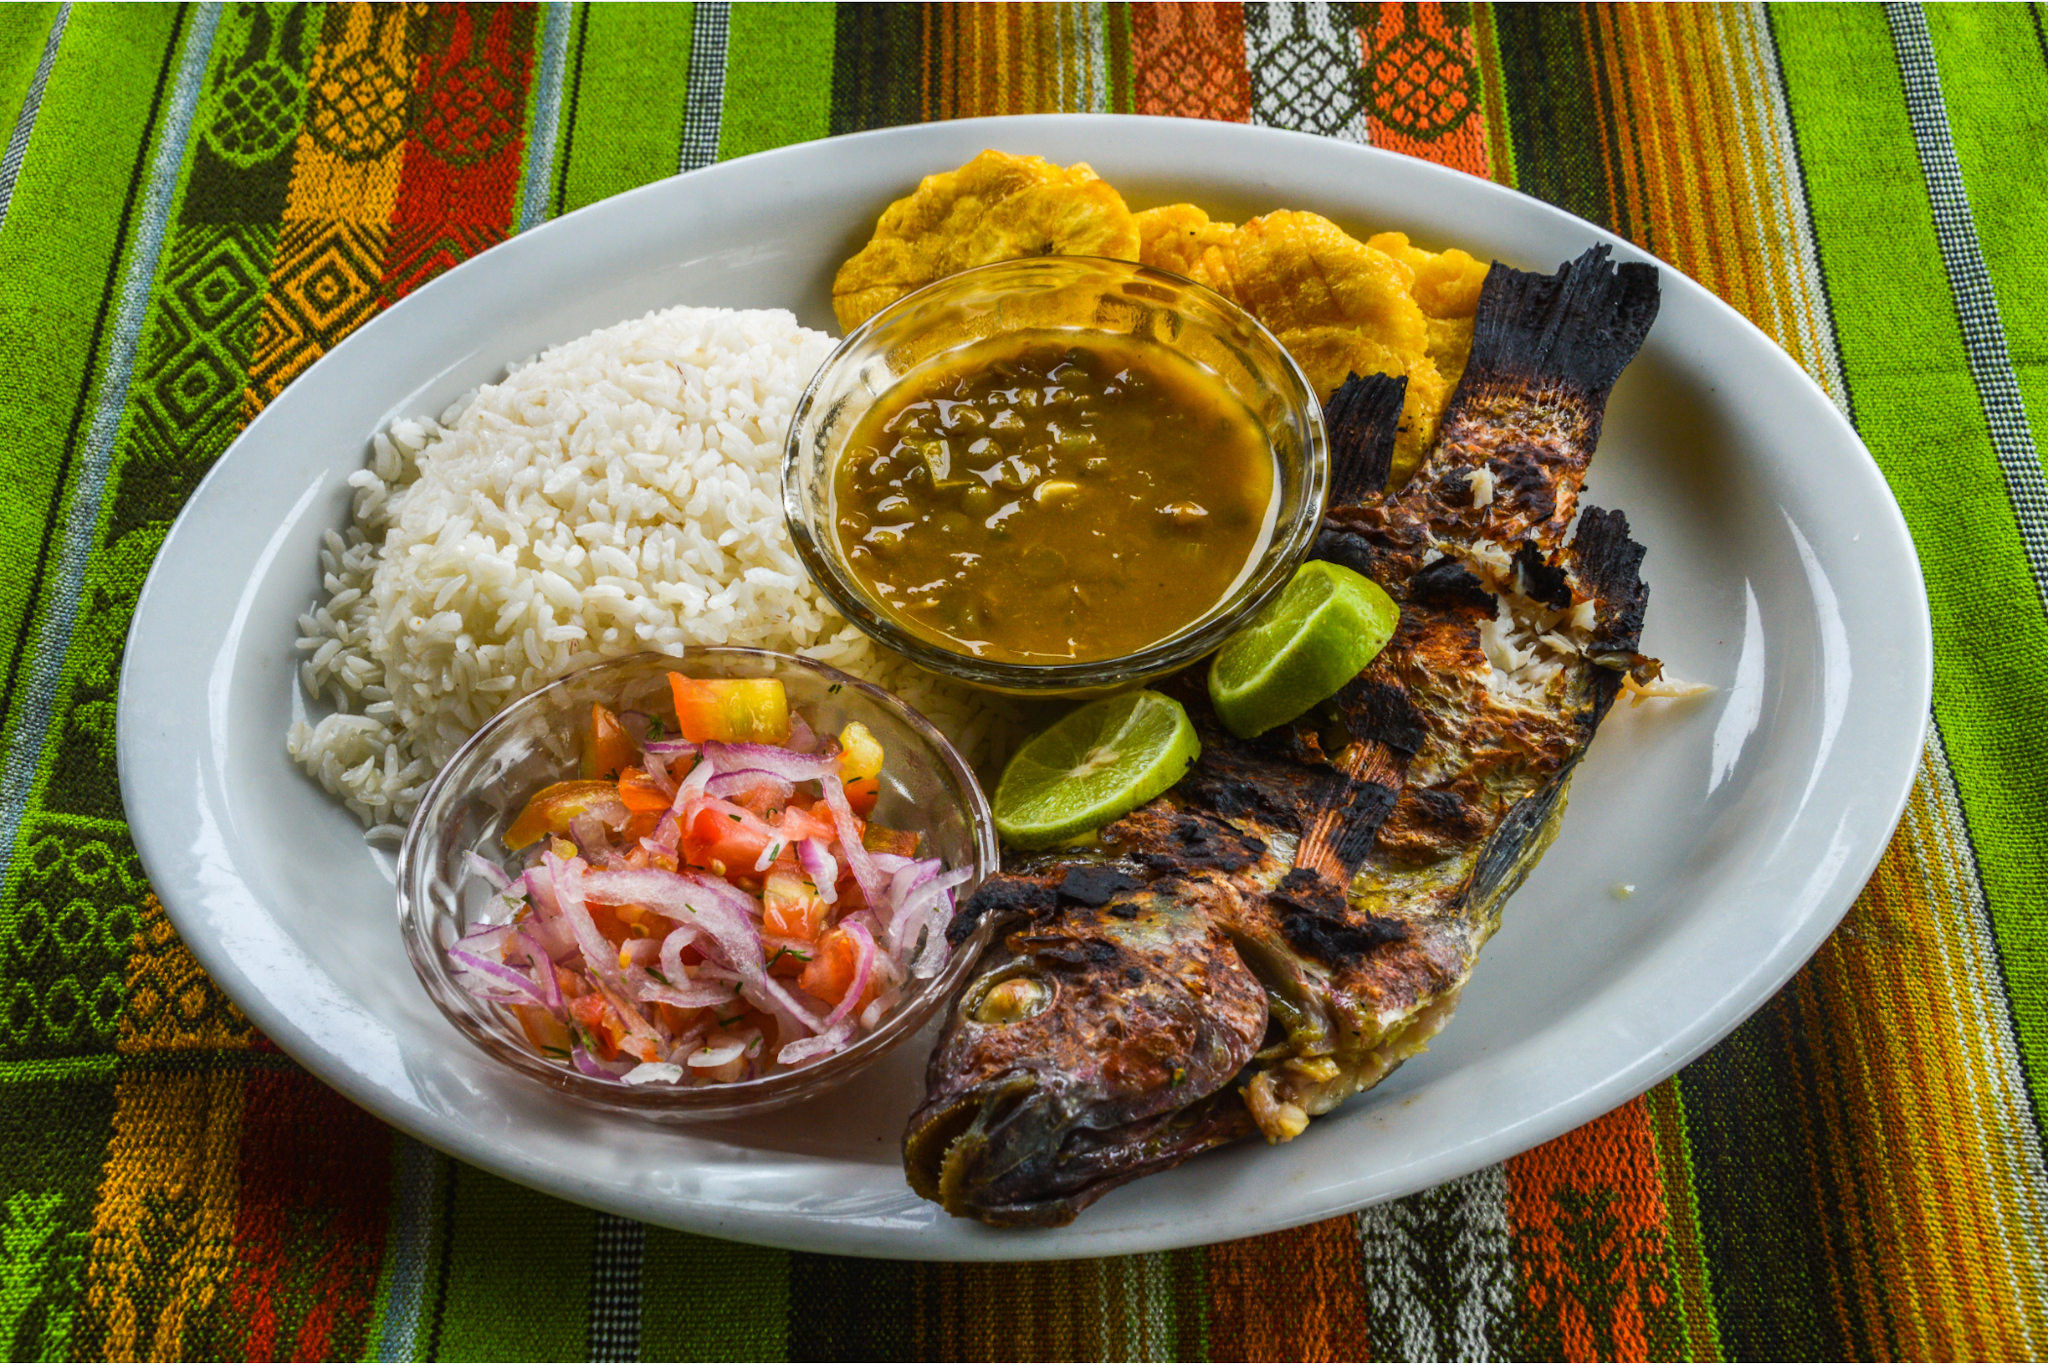 A plate of grilled fish, a traditional dish in the Amazon. 